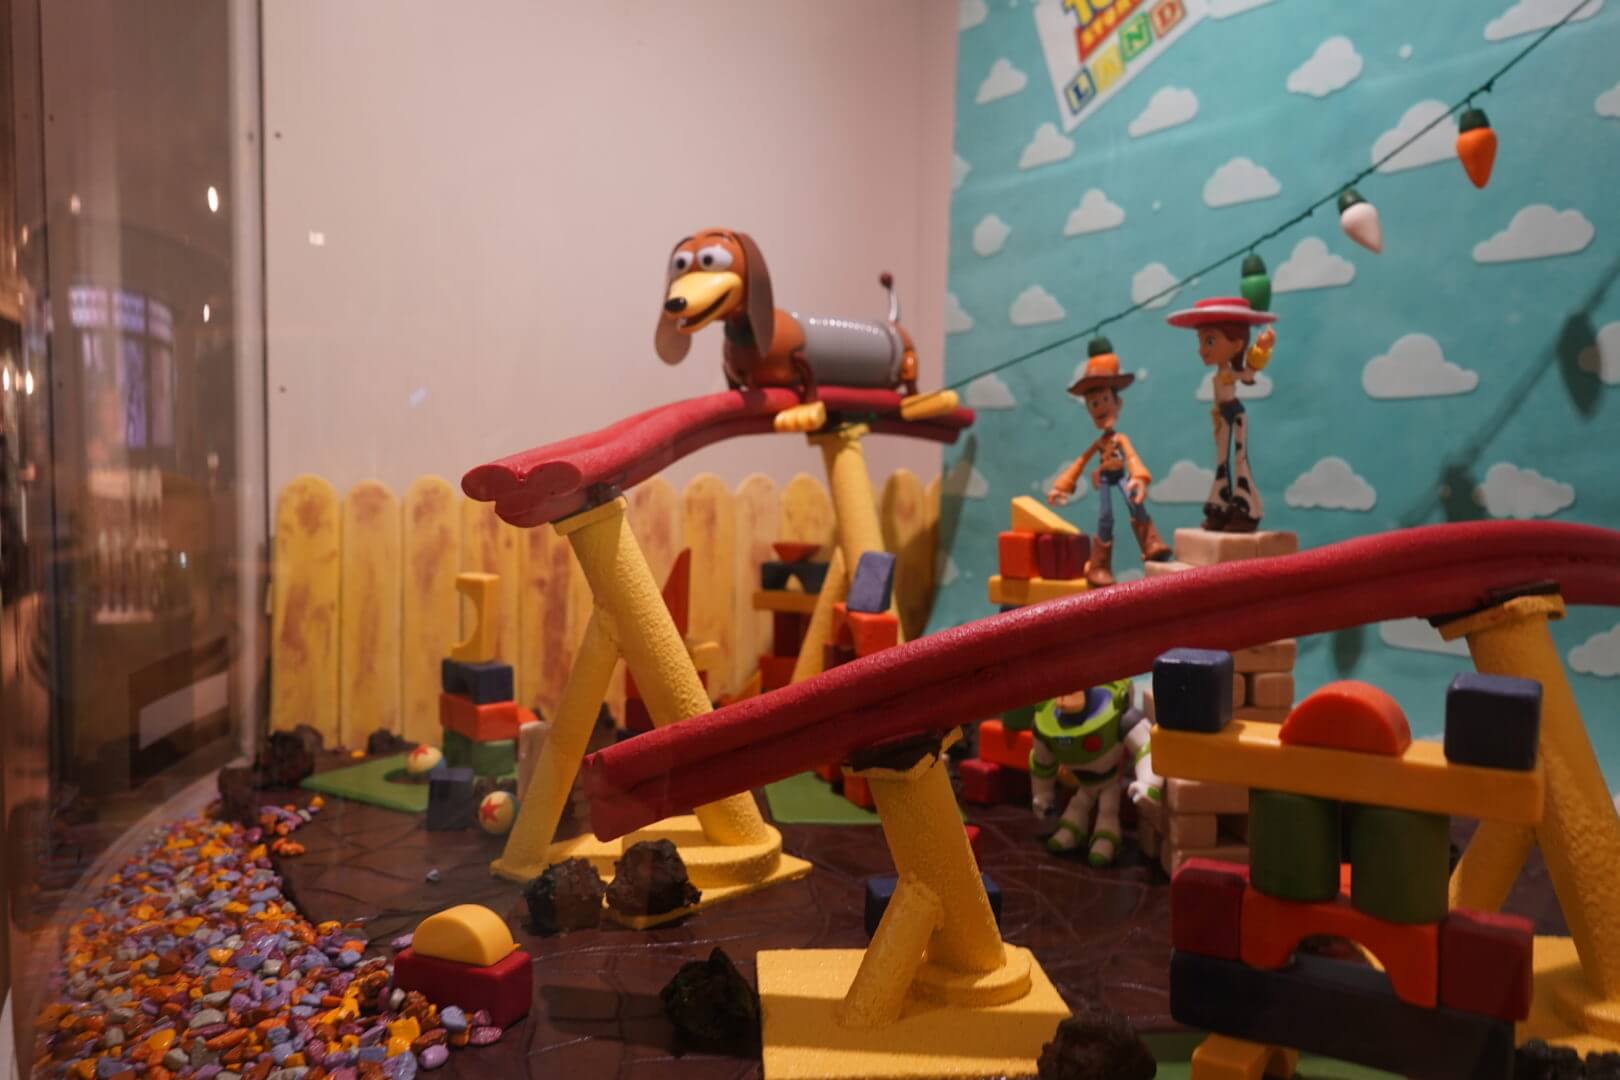 Chocolate Model of Toy Story Land at The Chocolate Experience in Epcot's Food & Wine Festival 2018